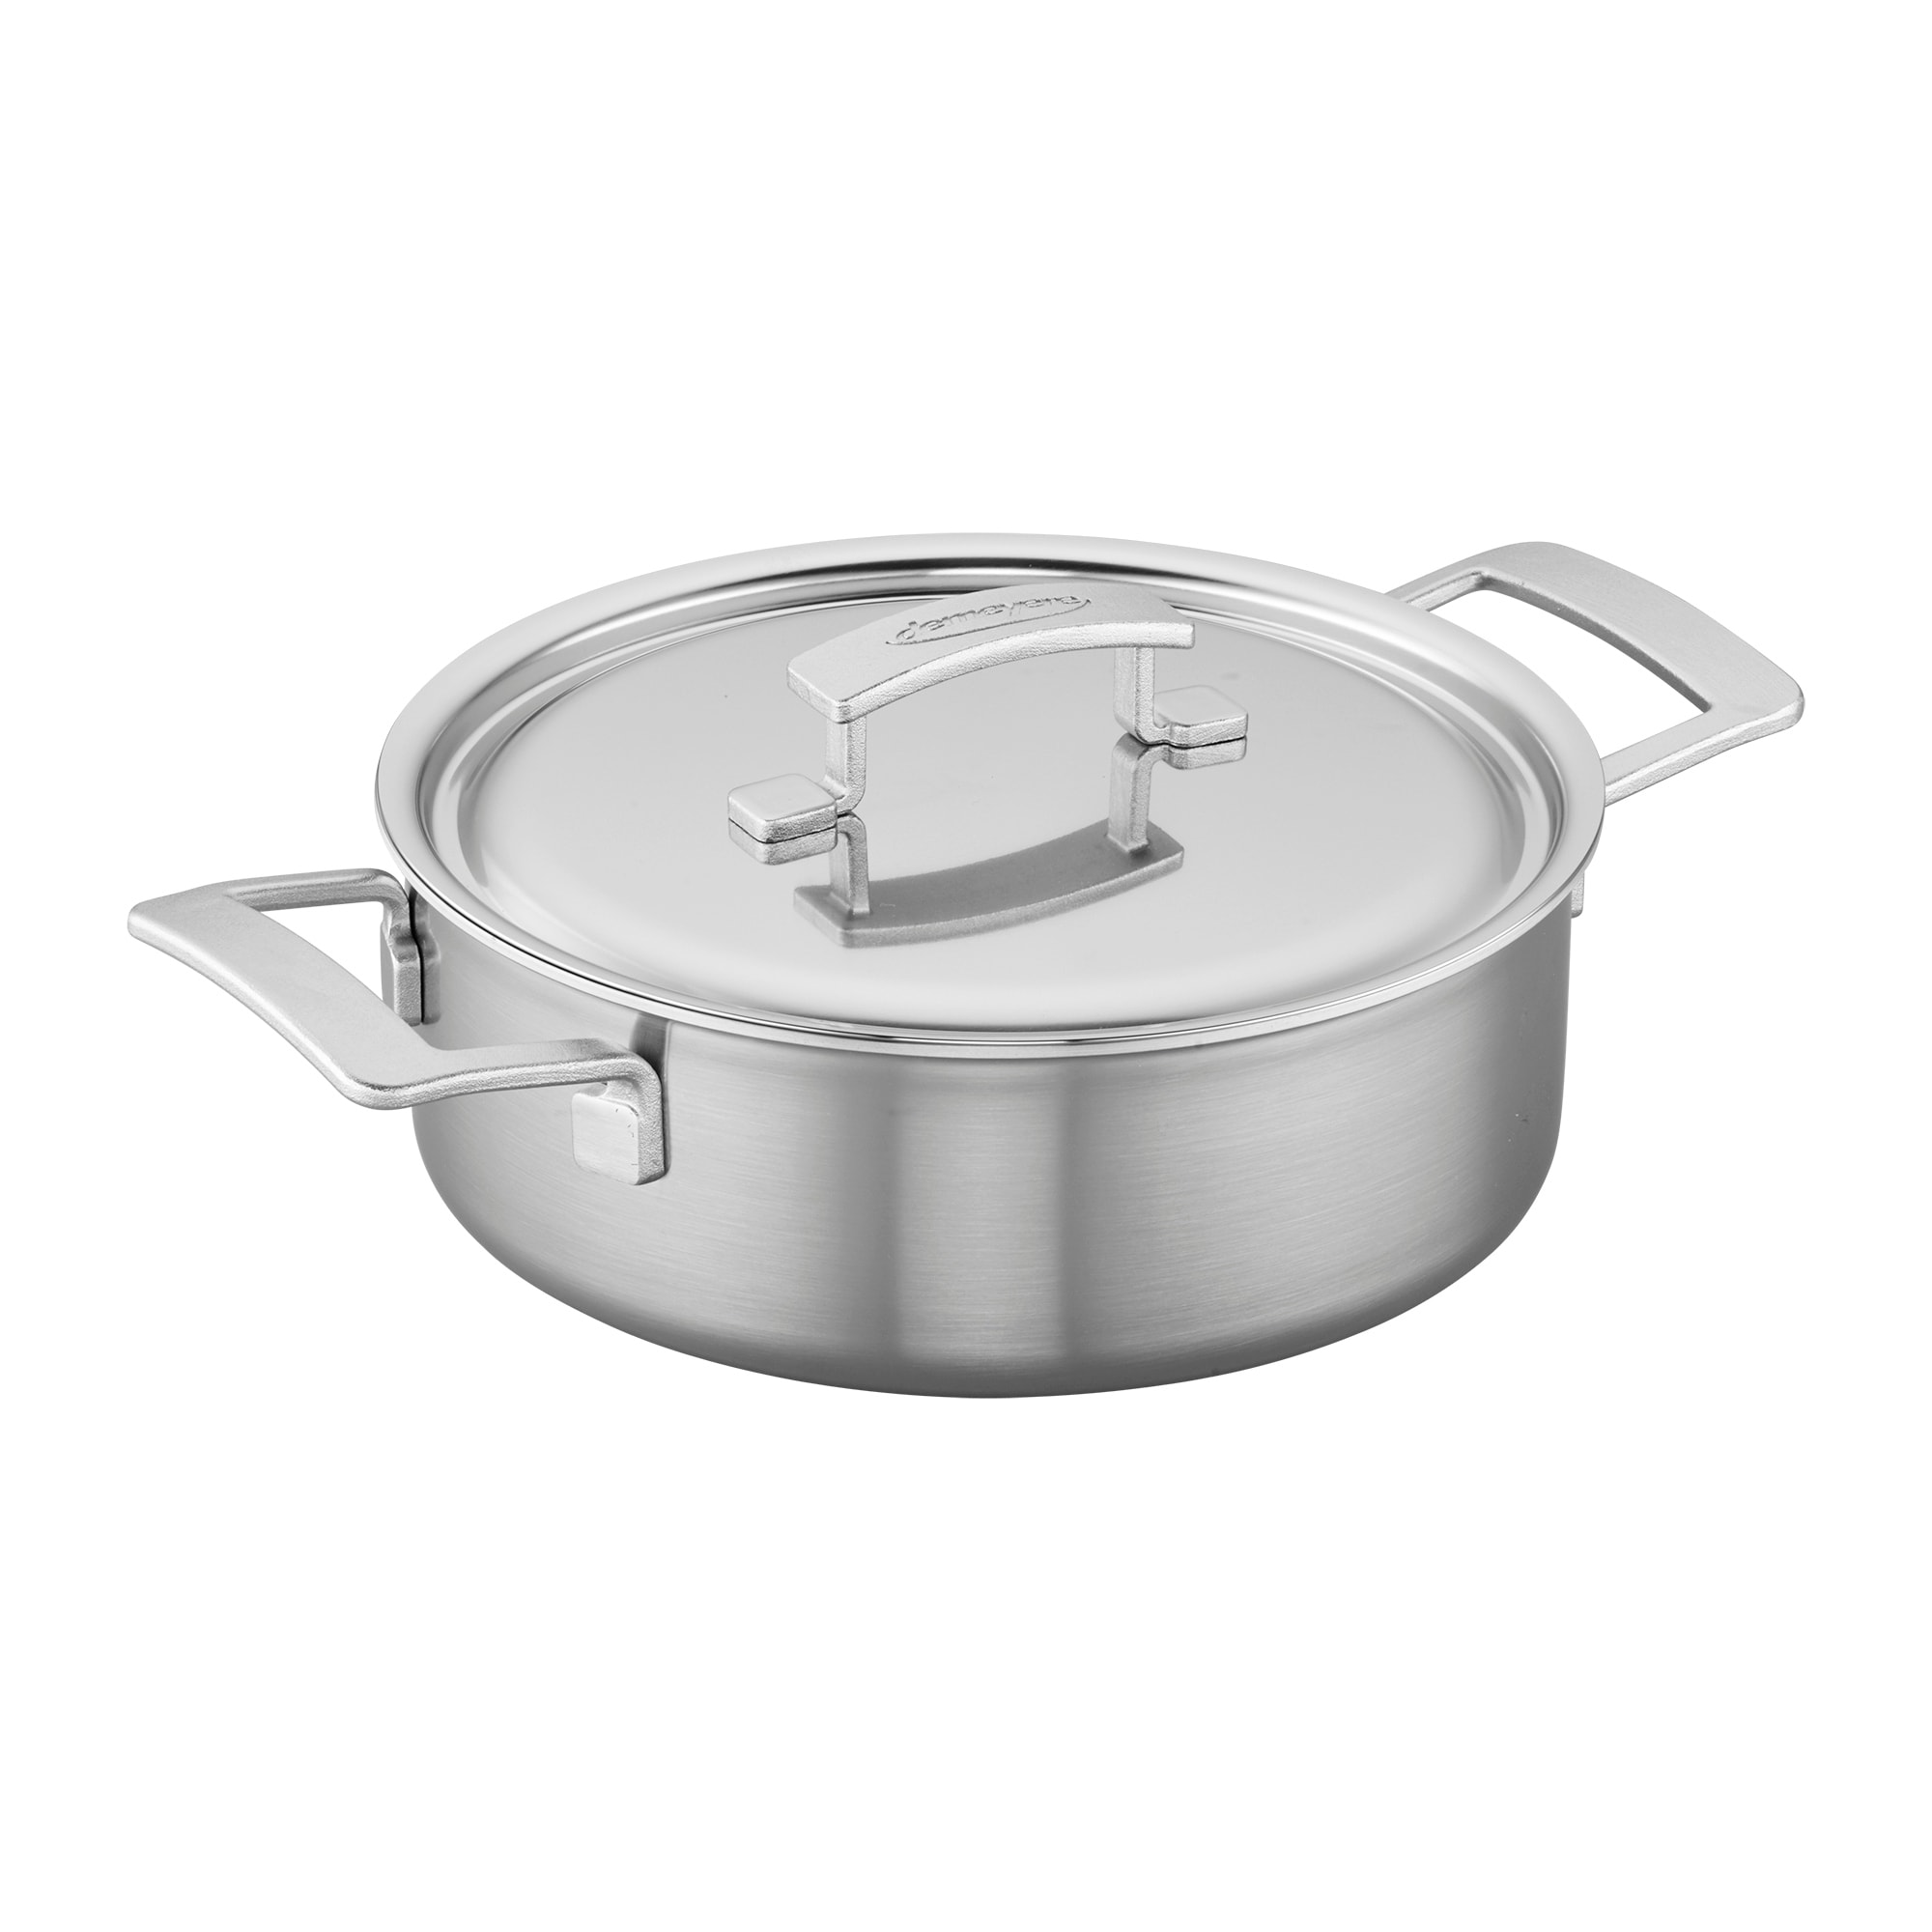 https://ak1.ostkcdn.com/images/products/is/images/direct/e1d2d61bf96f6f9a7cde0a36401786f14eb30297/Demeyere-Industry-5-Ply-4-qt-Stainless-Steel-Deep-Saute-Pan.jpg